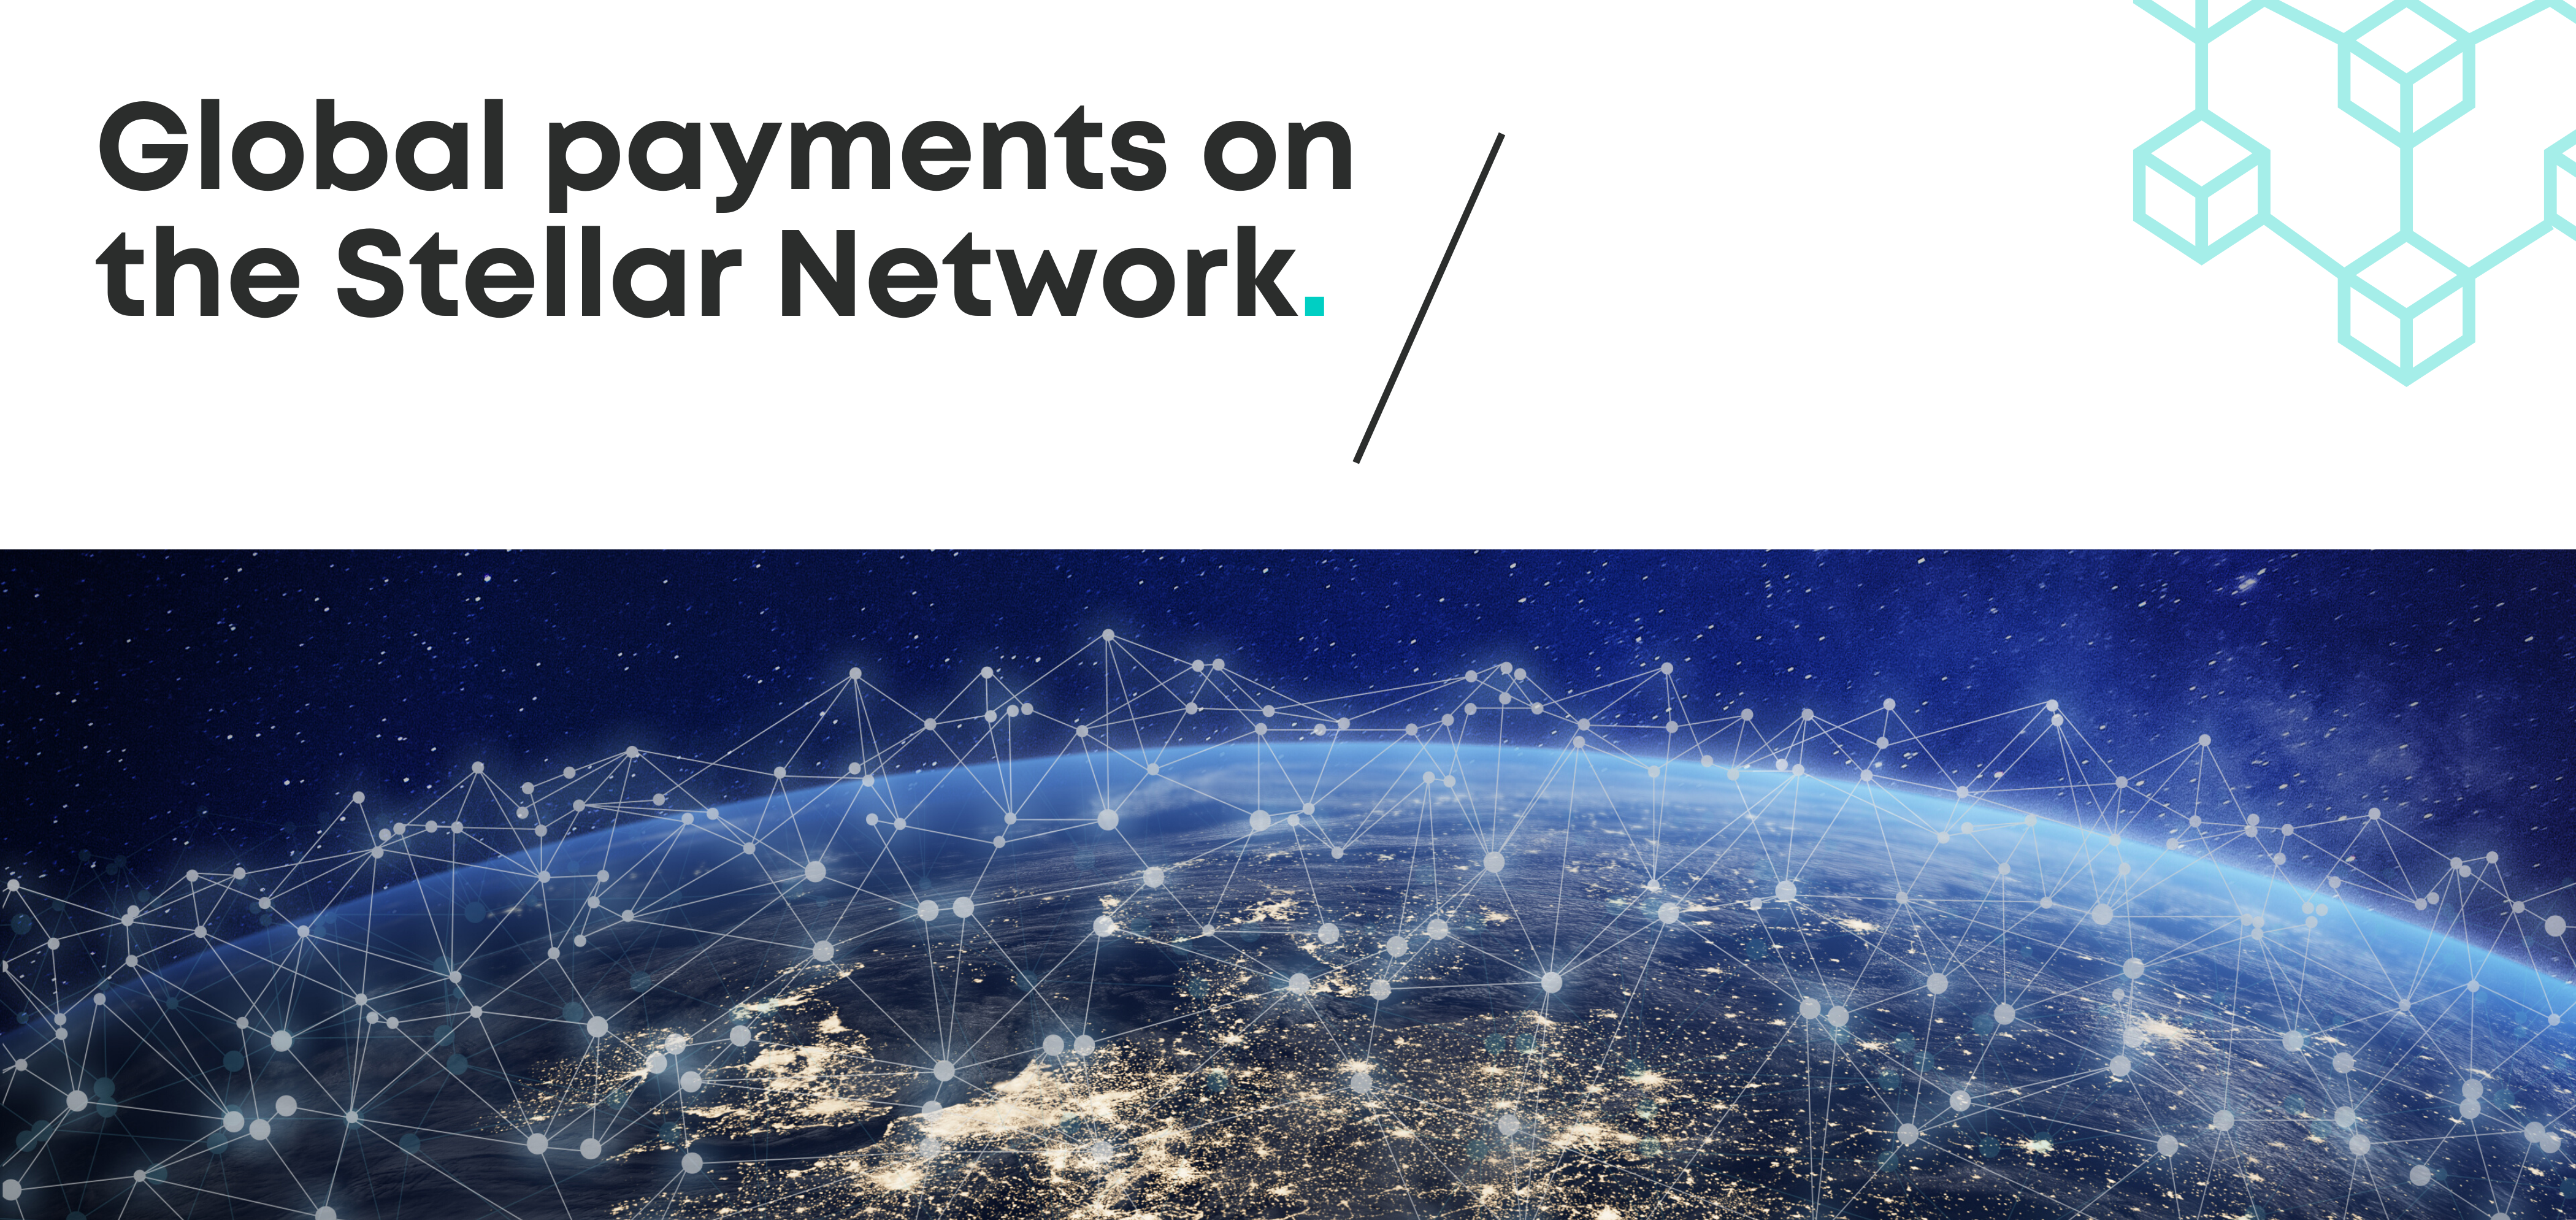 DTransfer Blog - 5 Ways the Stellar Network is Changing the Global Payment Industry